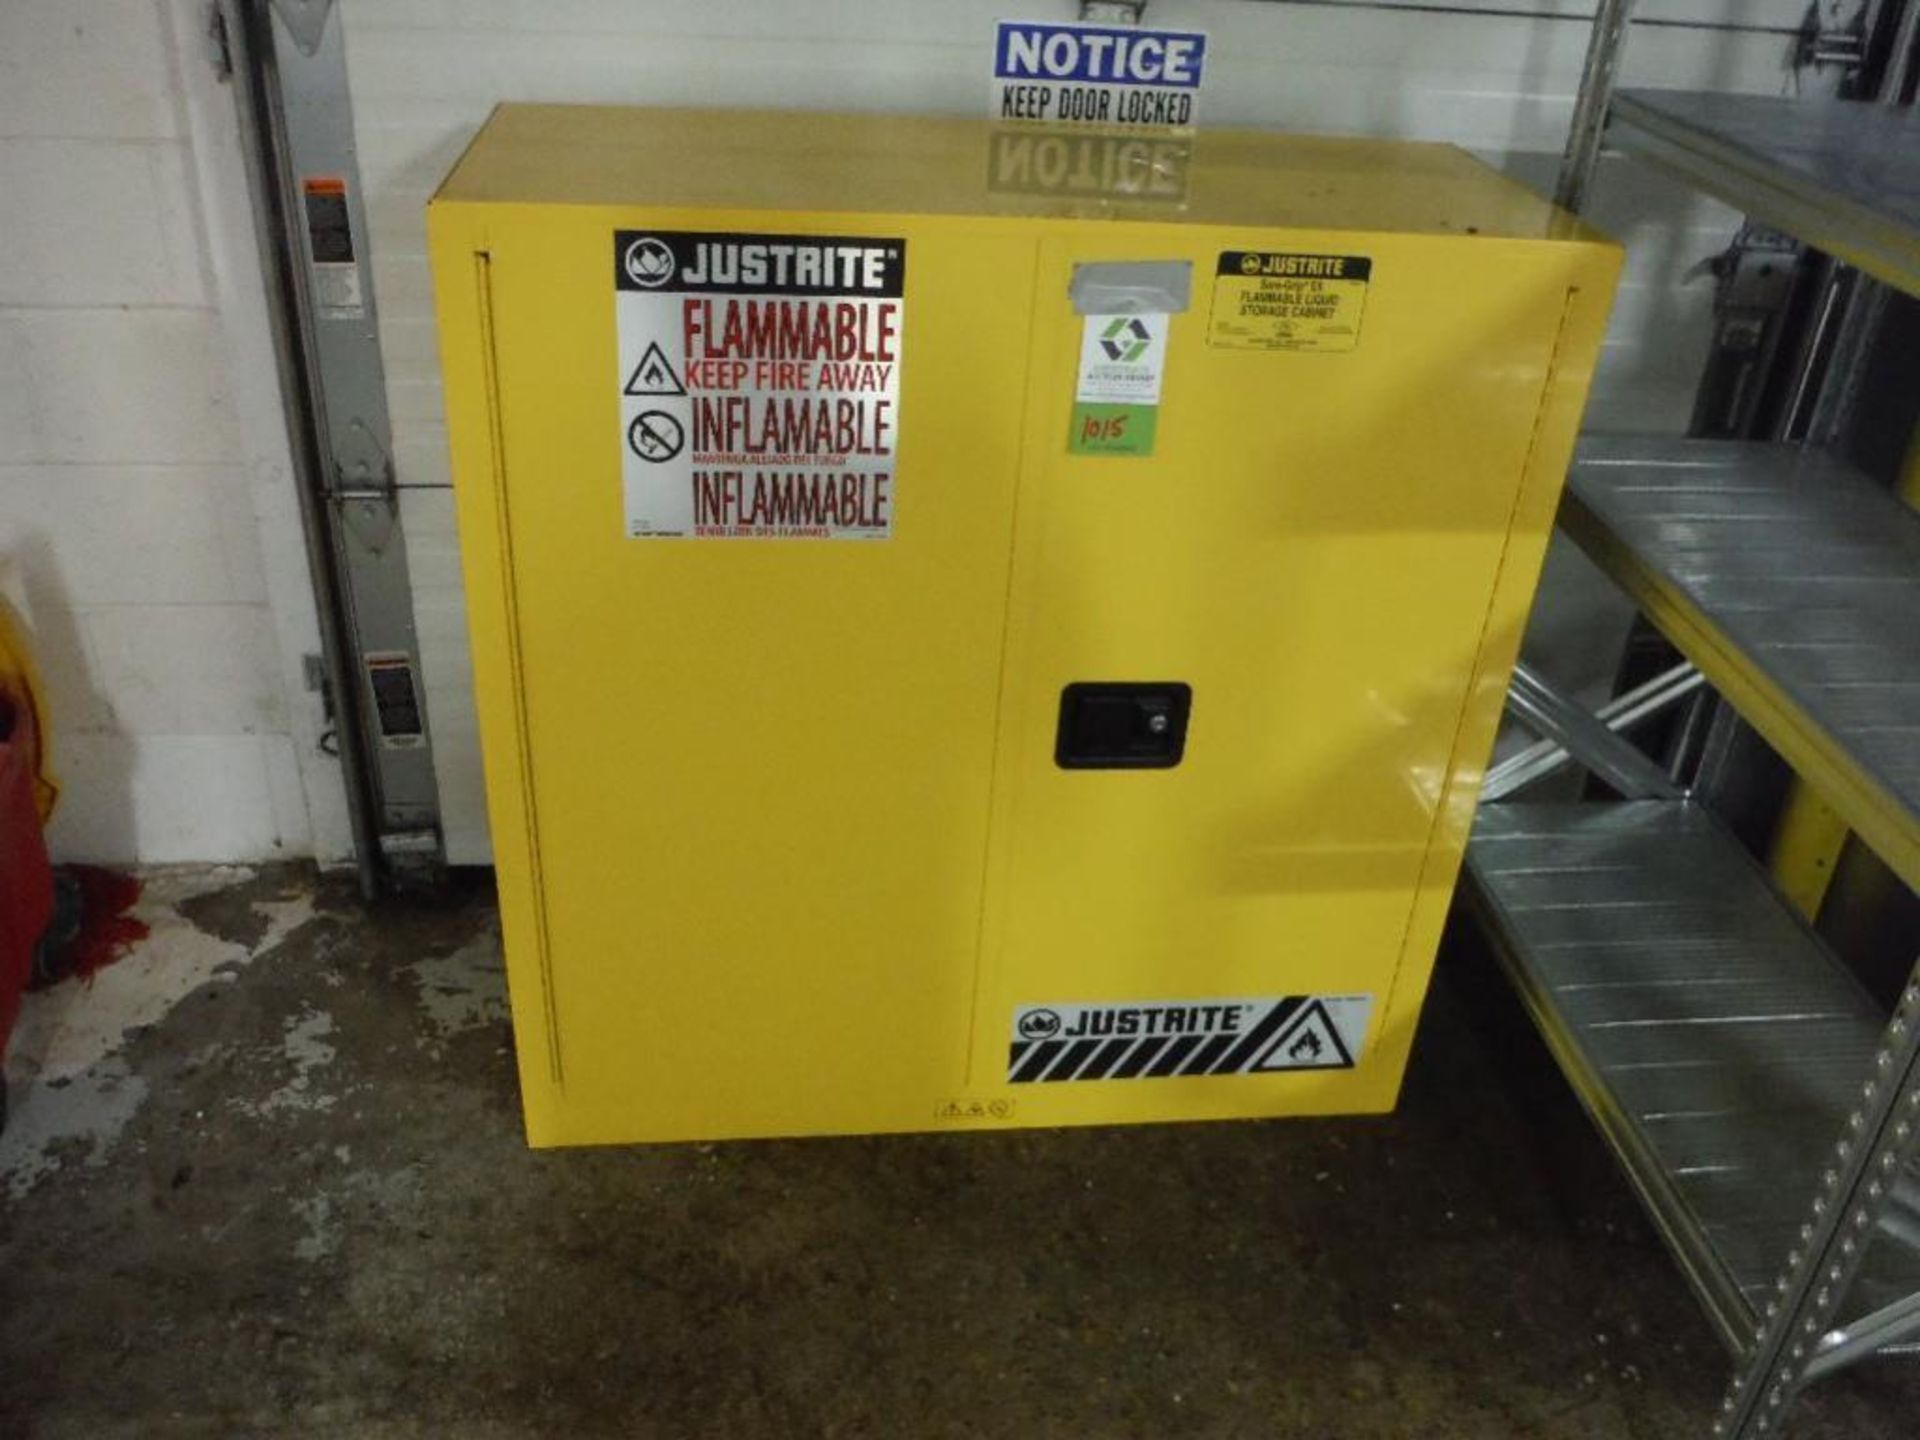 Just rite flammable storage cabinet, 30 gal, 43 in. wide x 18 in. deep 44 in. tall - Rigging Fee: $5